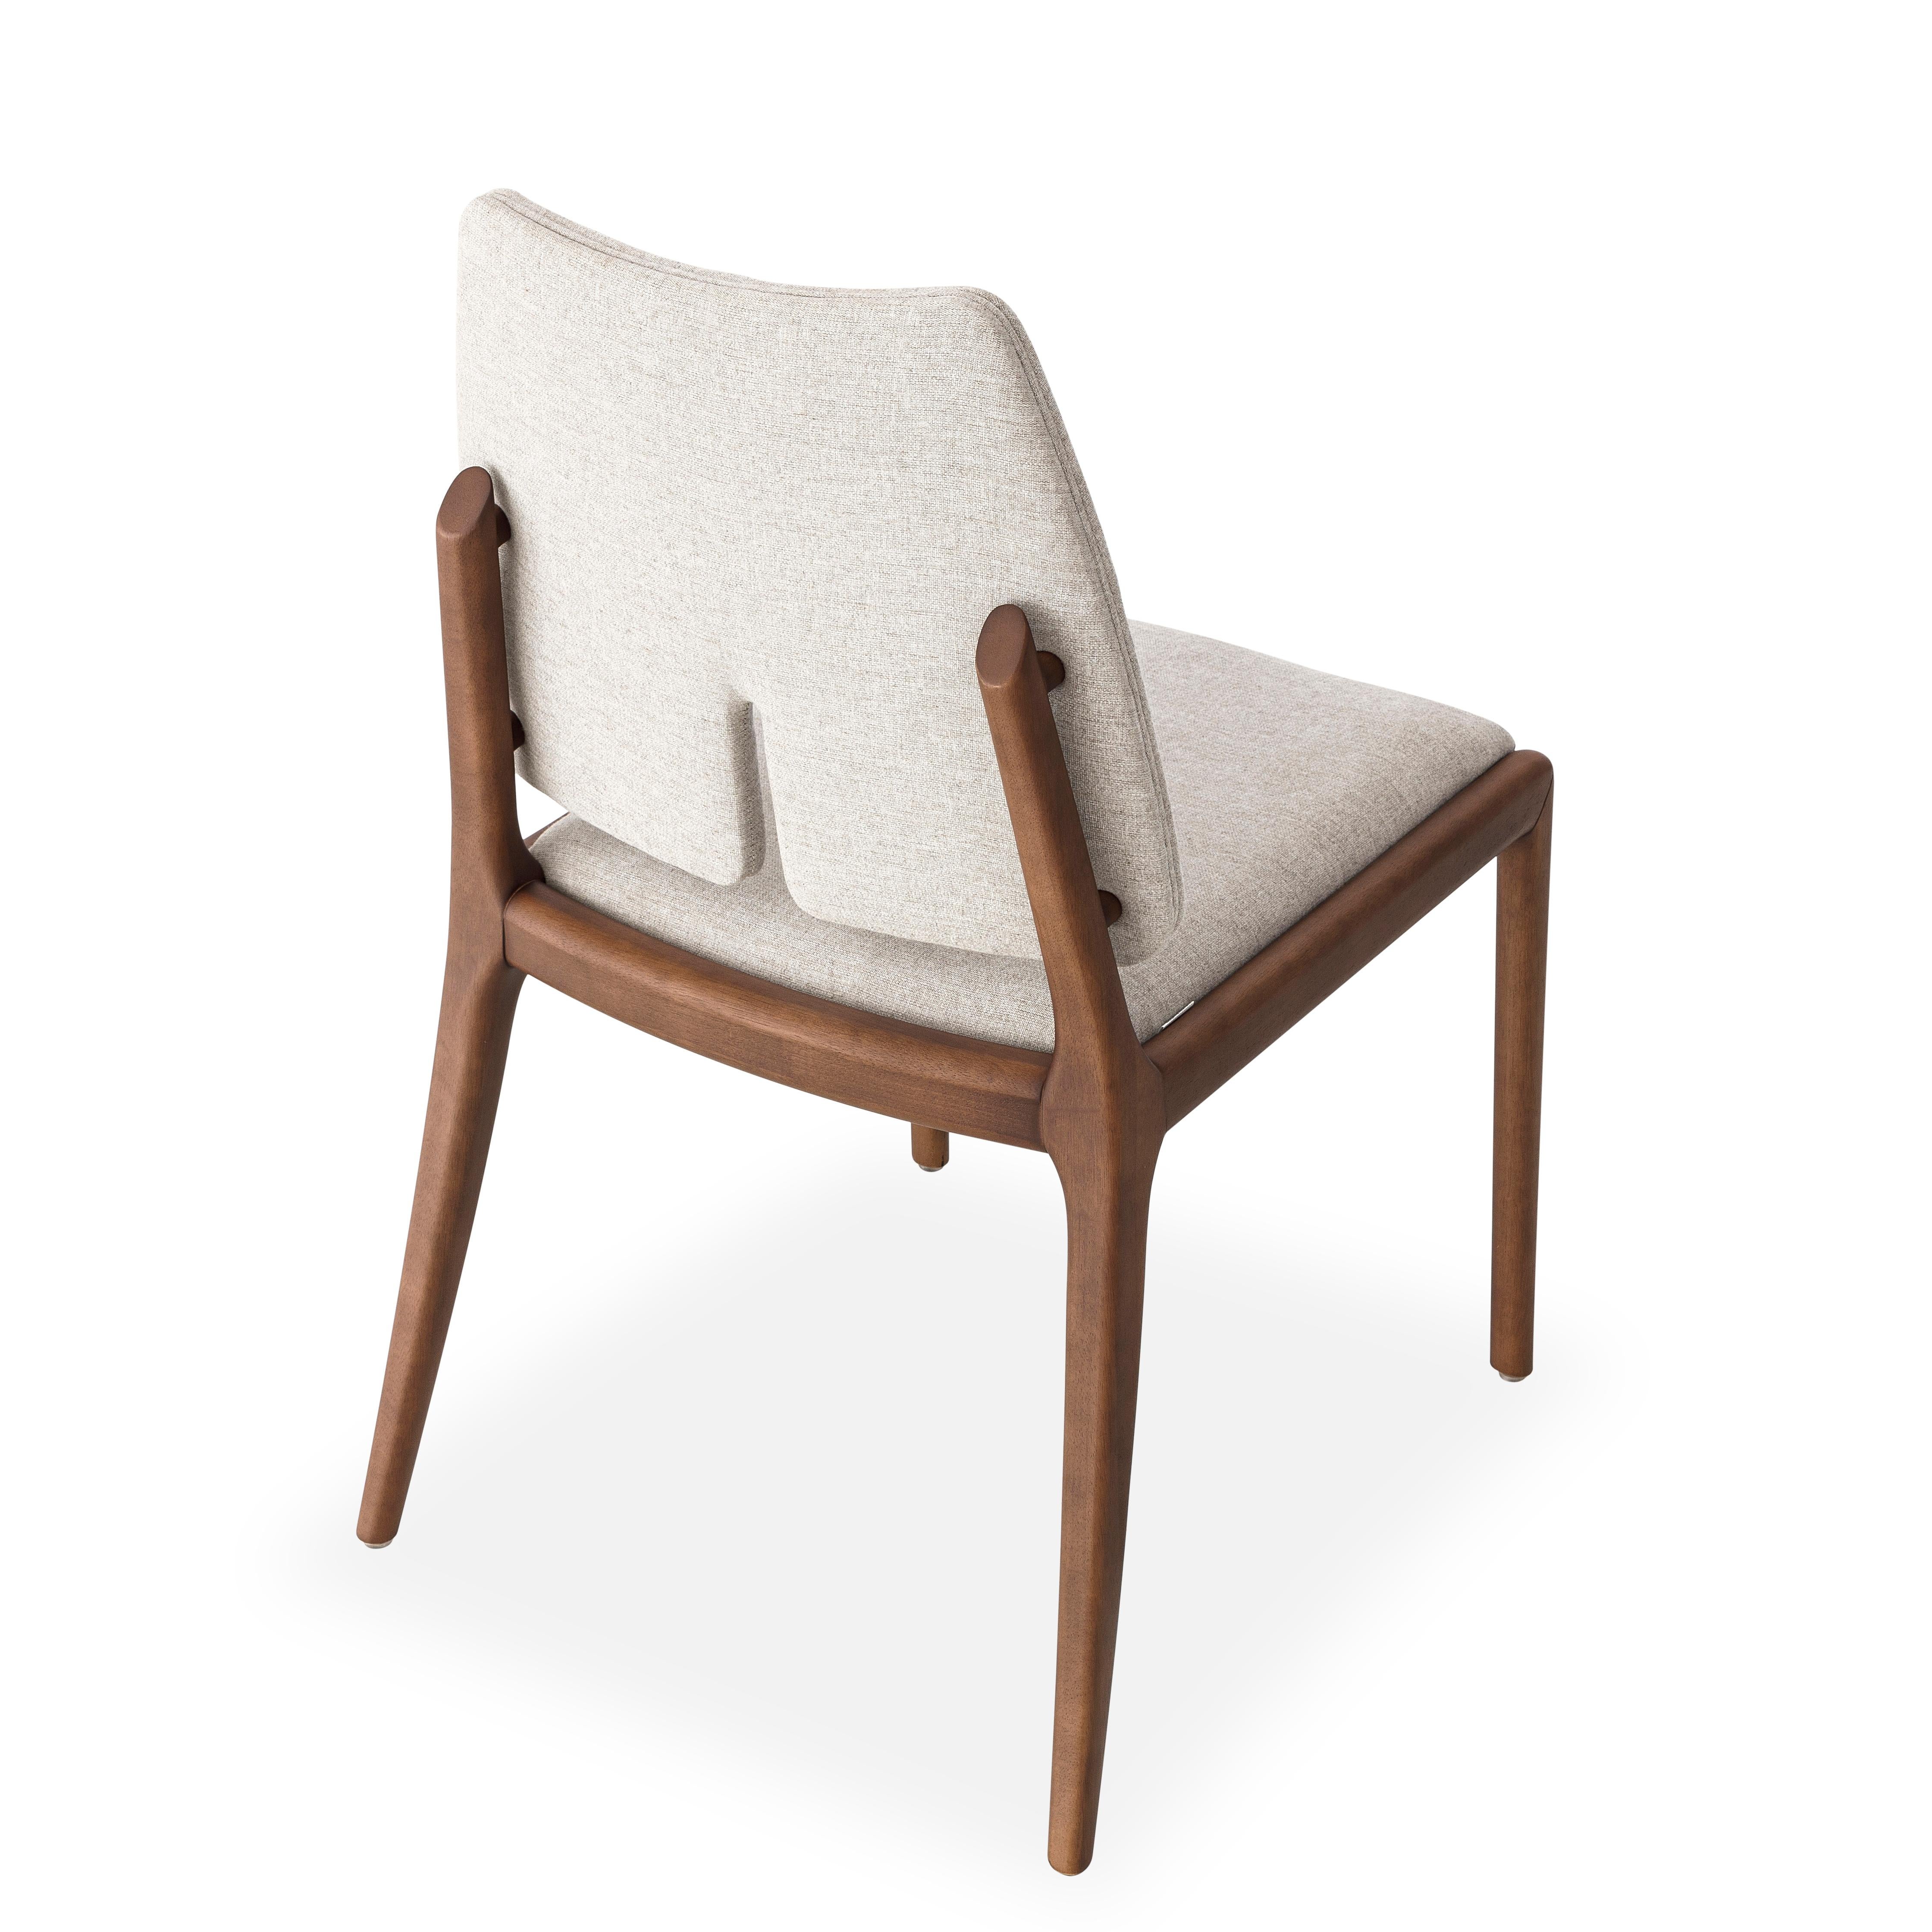 Upholstery Slit Dining Chair in Walnut Wood Finish and Light Beige Cotton Fabric, Set of 2 For Sale